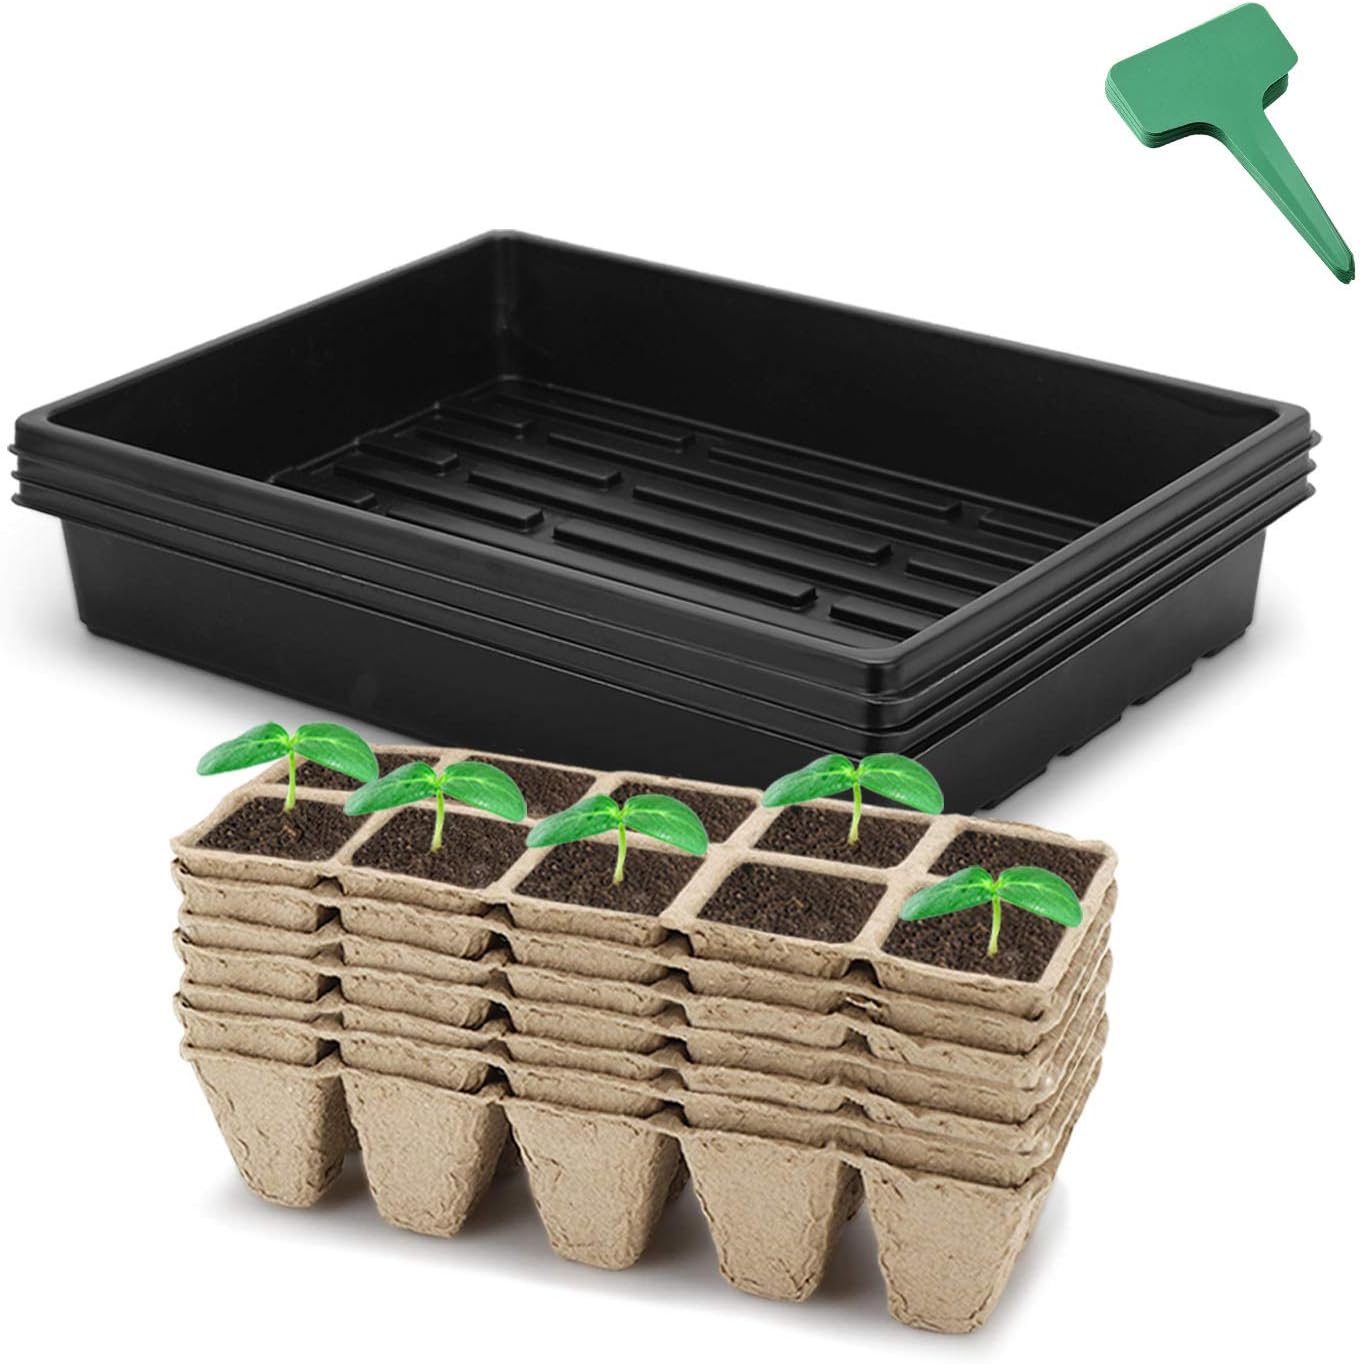 CEED4U Seed Starter Kit, 150 Cells Peat Pot Trays, 15x11 Inches Growing Trays, 15 Packs Plant Labels, Plant Cultivation Set for Gardeners, Classrooms, Greenhouse, DIY Projects